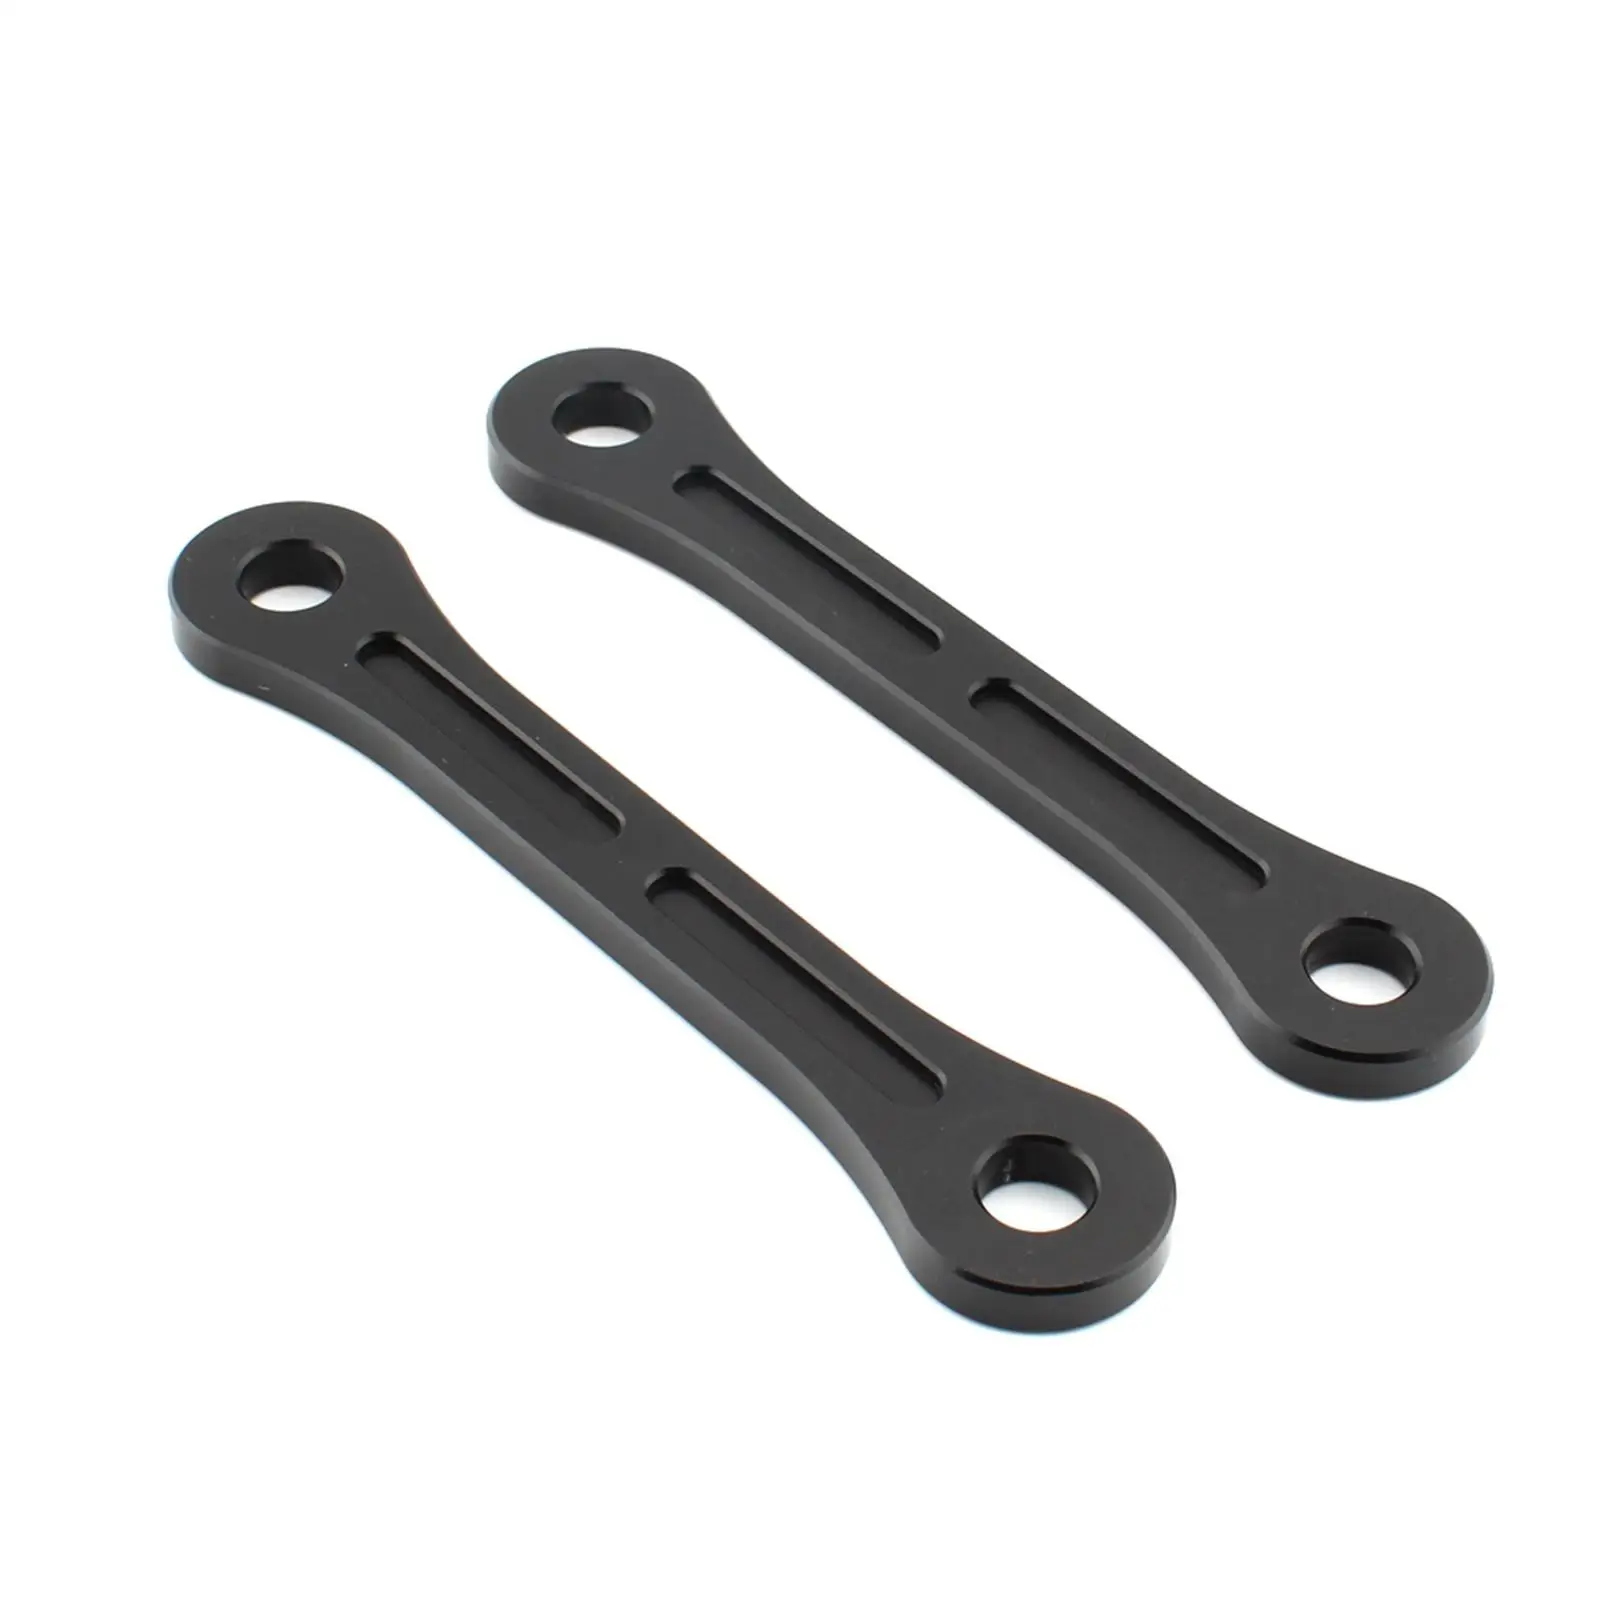 2 Pieces Motorcycle Lowering Drop Linkage Sturdy Aluminum Alloy 35mm Lowering